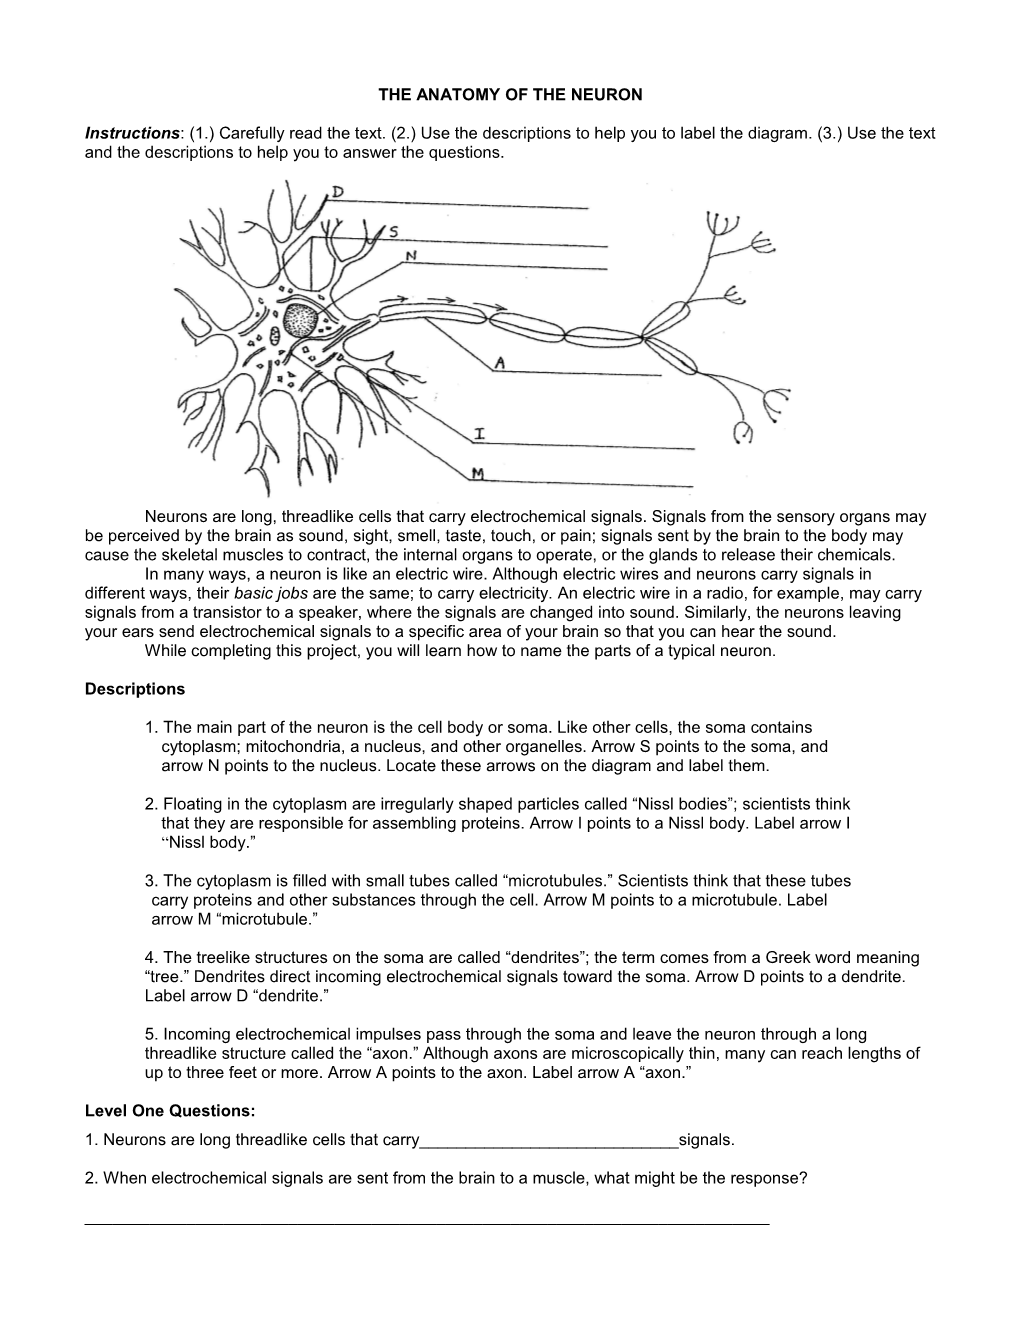 The Anatomy of the Neuron